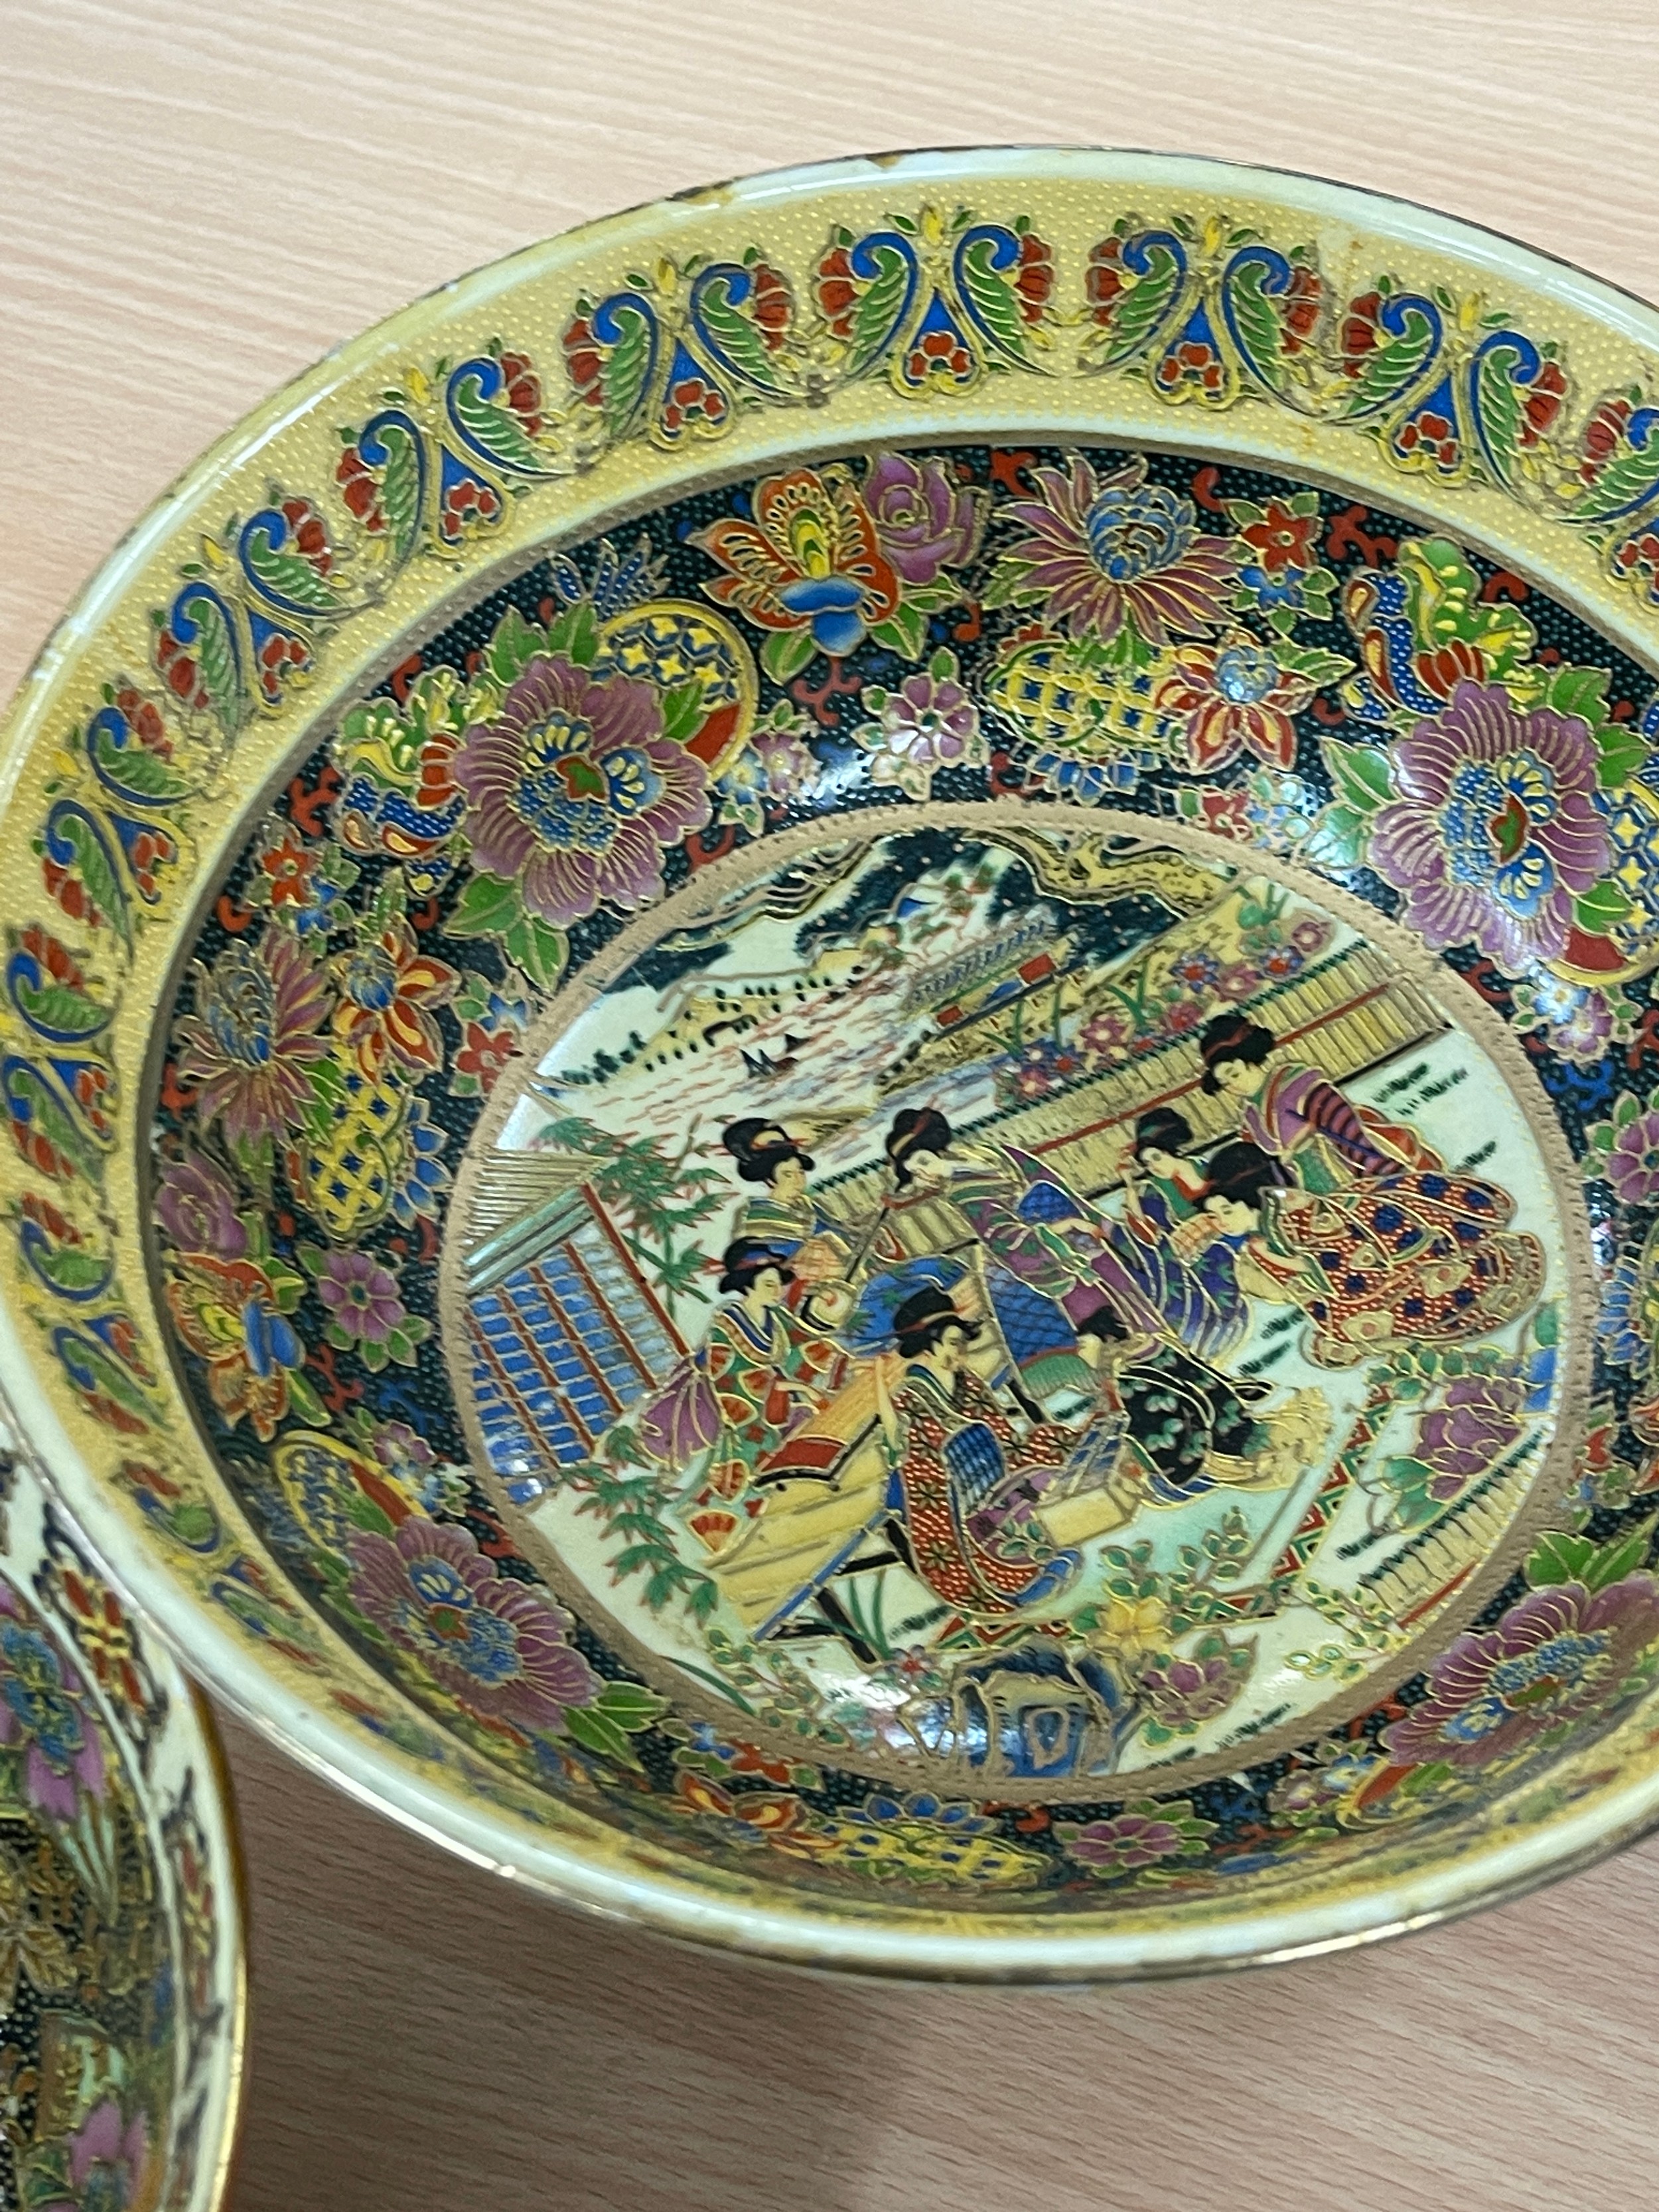 2 Japanese hand painted bowls, largest measures approximately 10 inches diameter 4.5 inches tall - Image 4 of 8